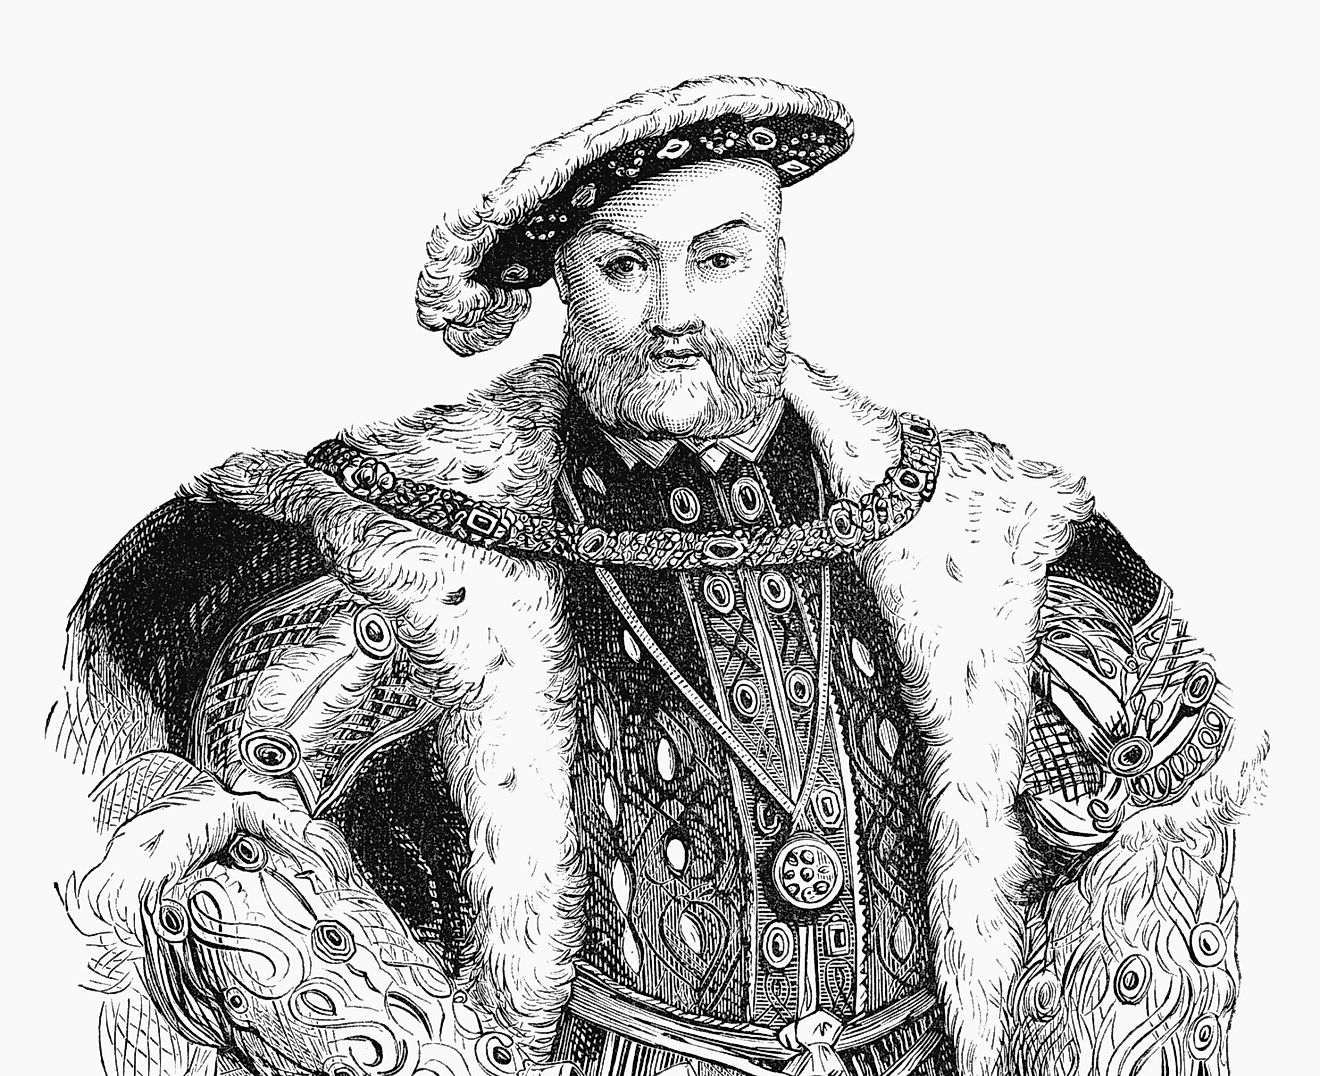 Henry VIII is well known for forming an Anglican Church independent from the Papal authority in Rome, as well as for his multiple spouses.